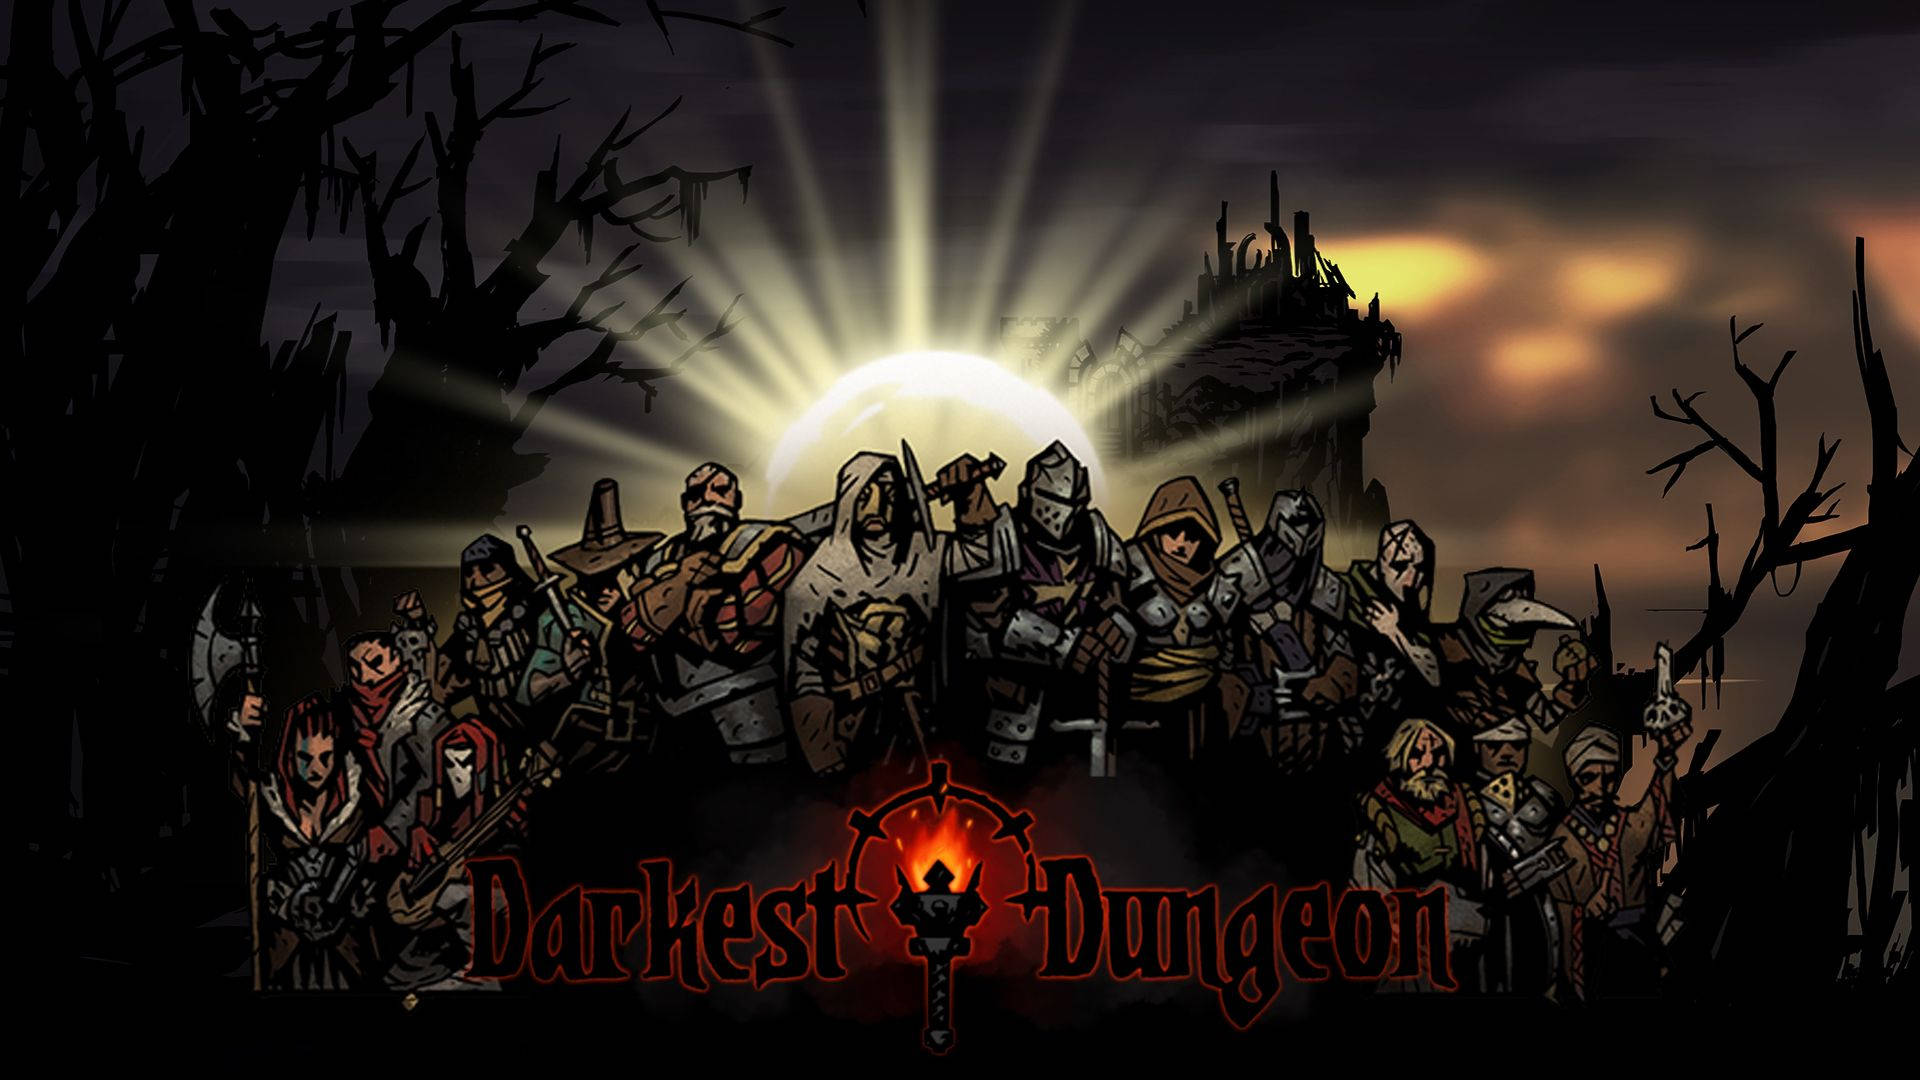 Go Forth Into the Darkest Dungeons Wallpaper